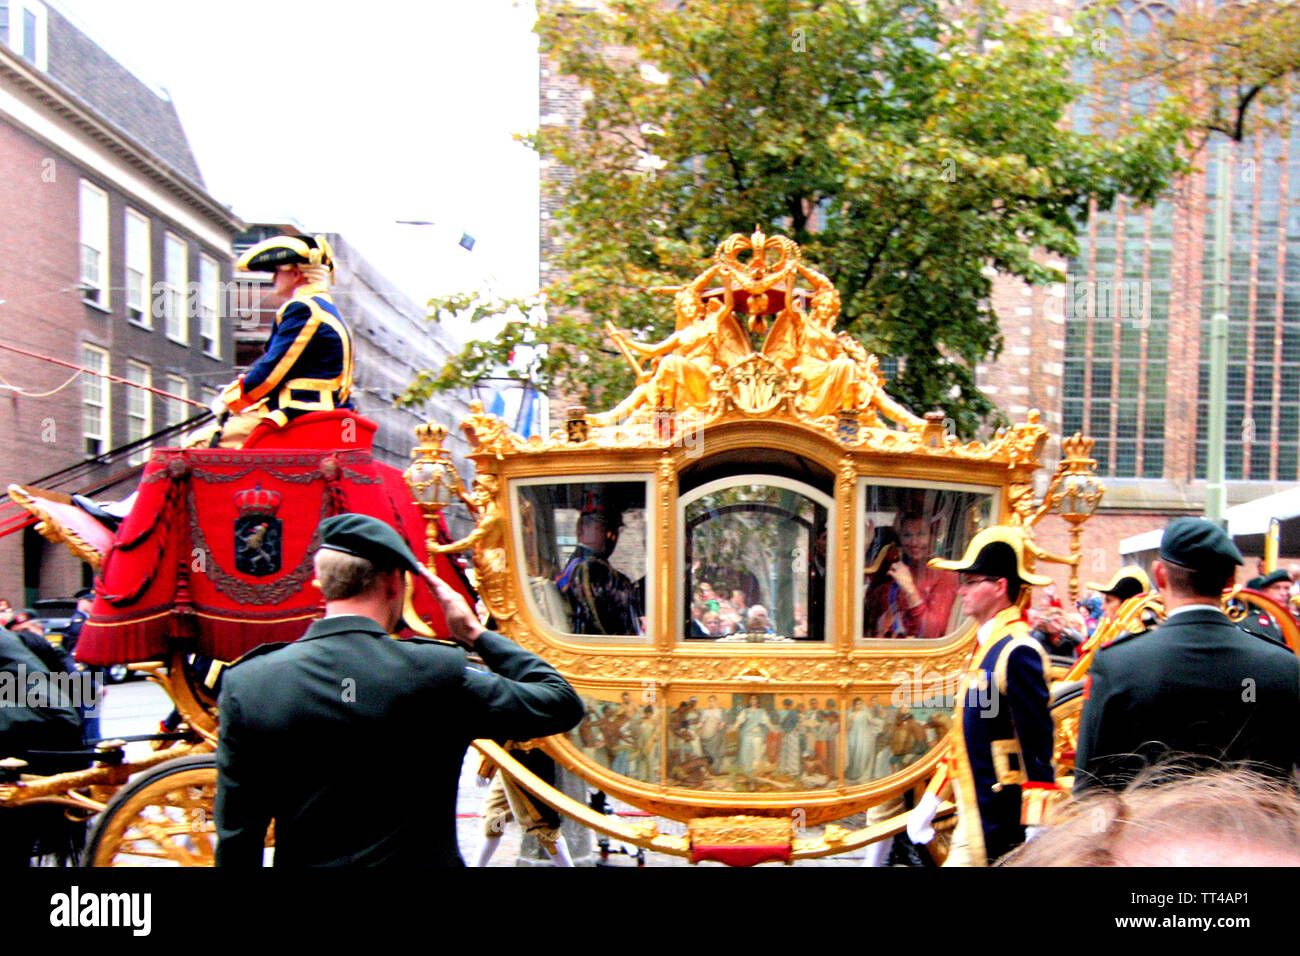 Military officers saluted when Queen Beatrix on the golden carriage was passing by Lange Voorhout Street on Prinsjesdag Parade in Den Haag, Nederland. Stock Photo